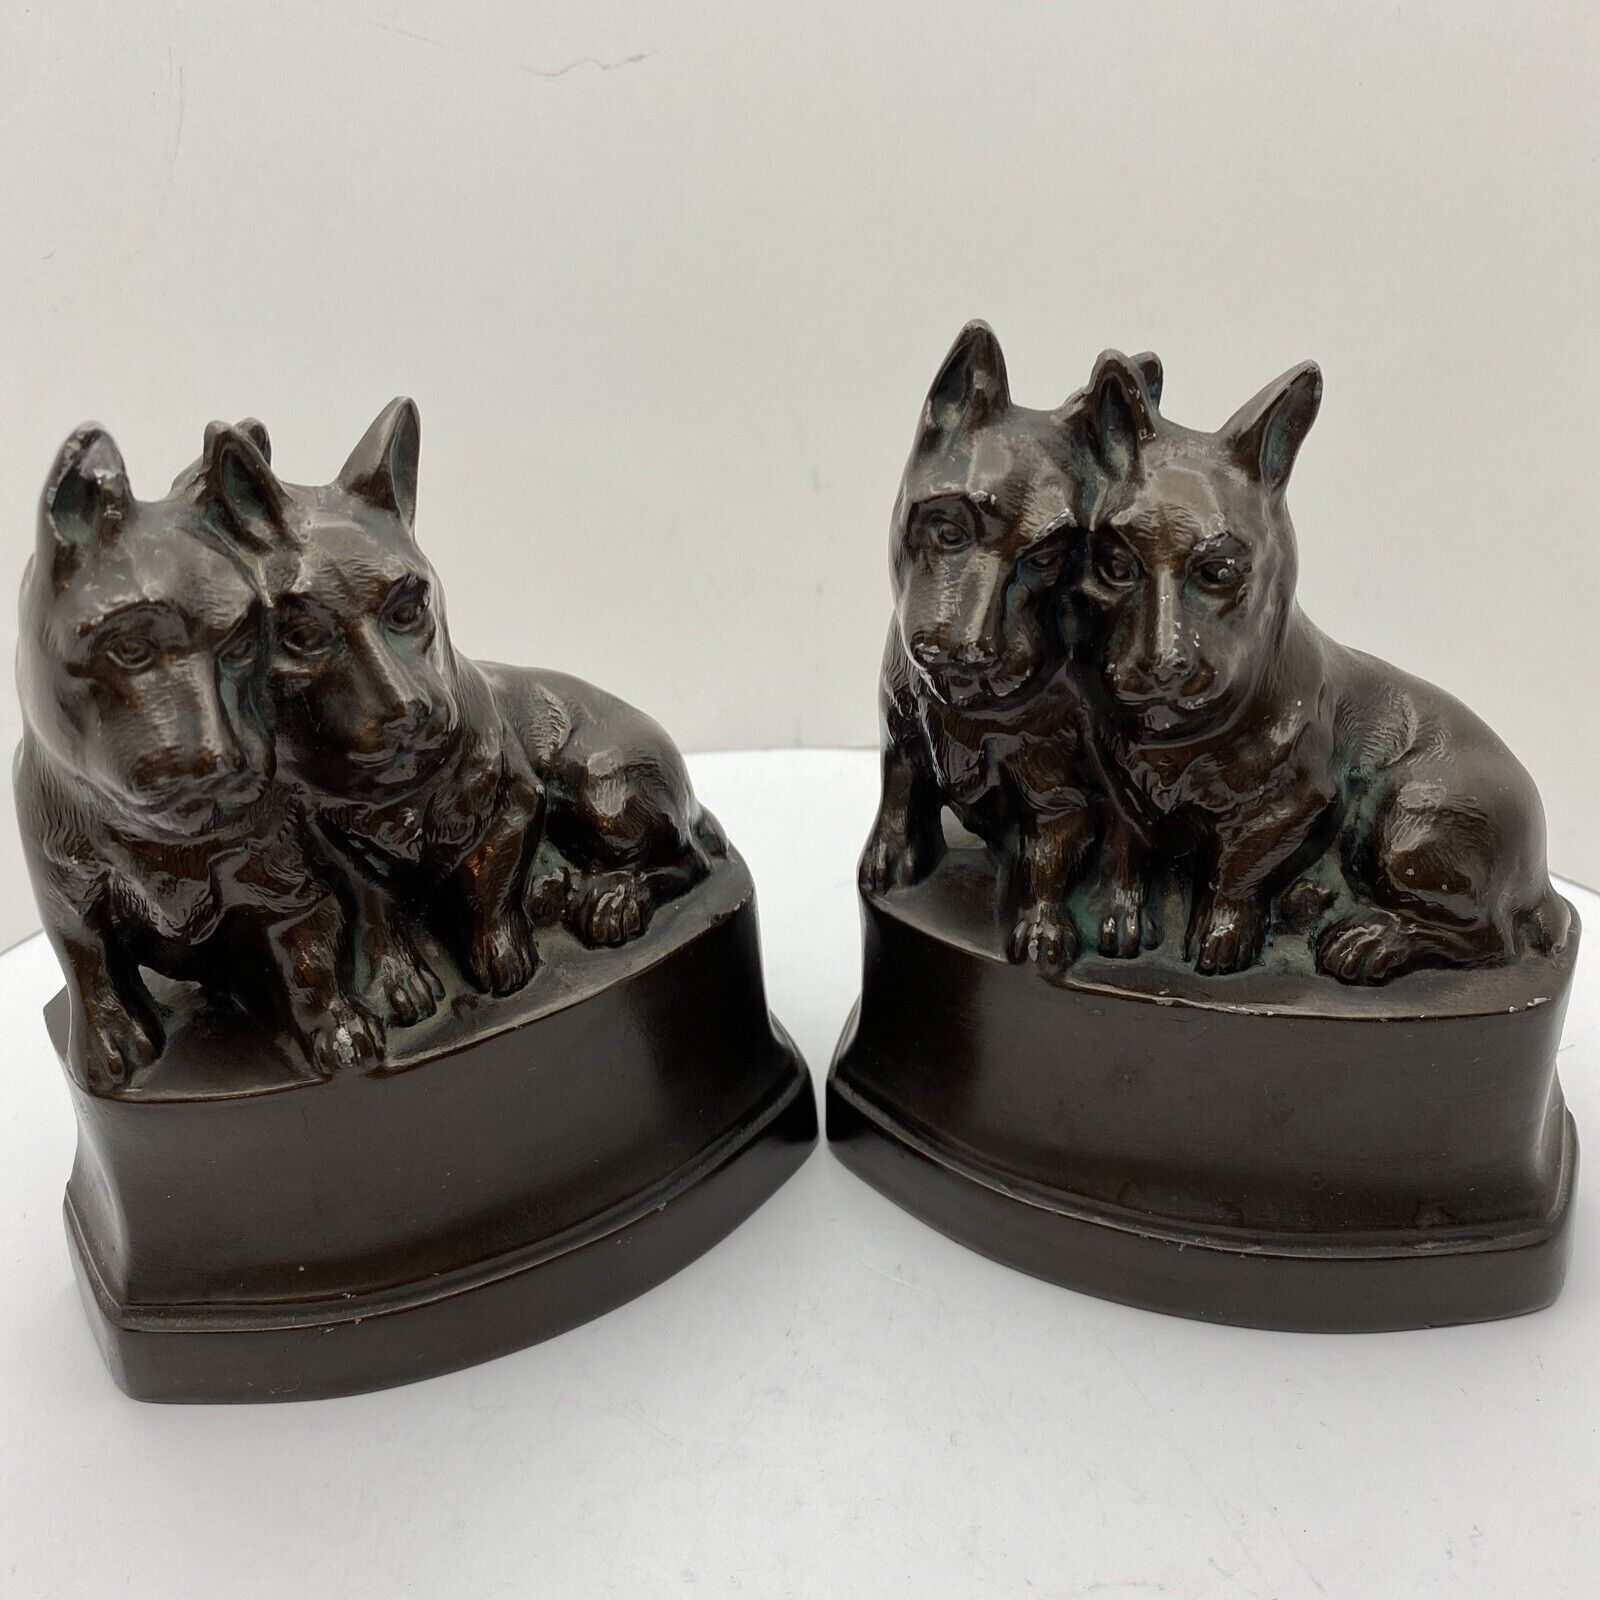 Vintage Bronze Finish Scotty Dog Bookends (2) Nuart Creations Made in USA Heavy